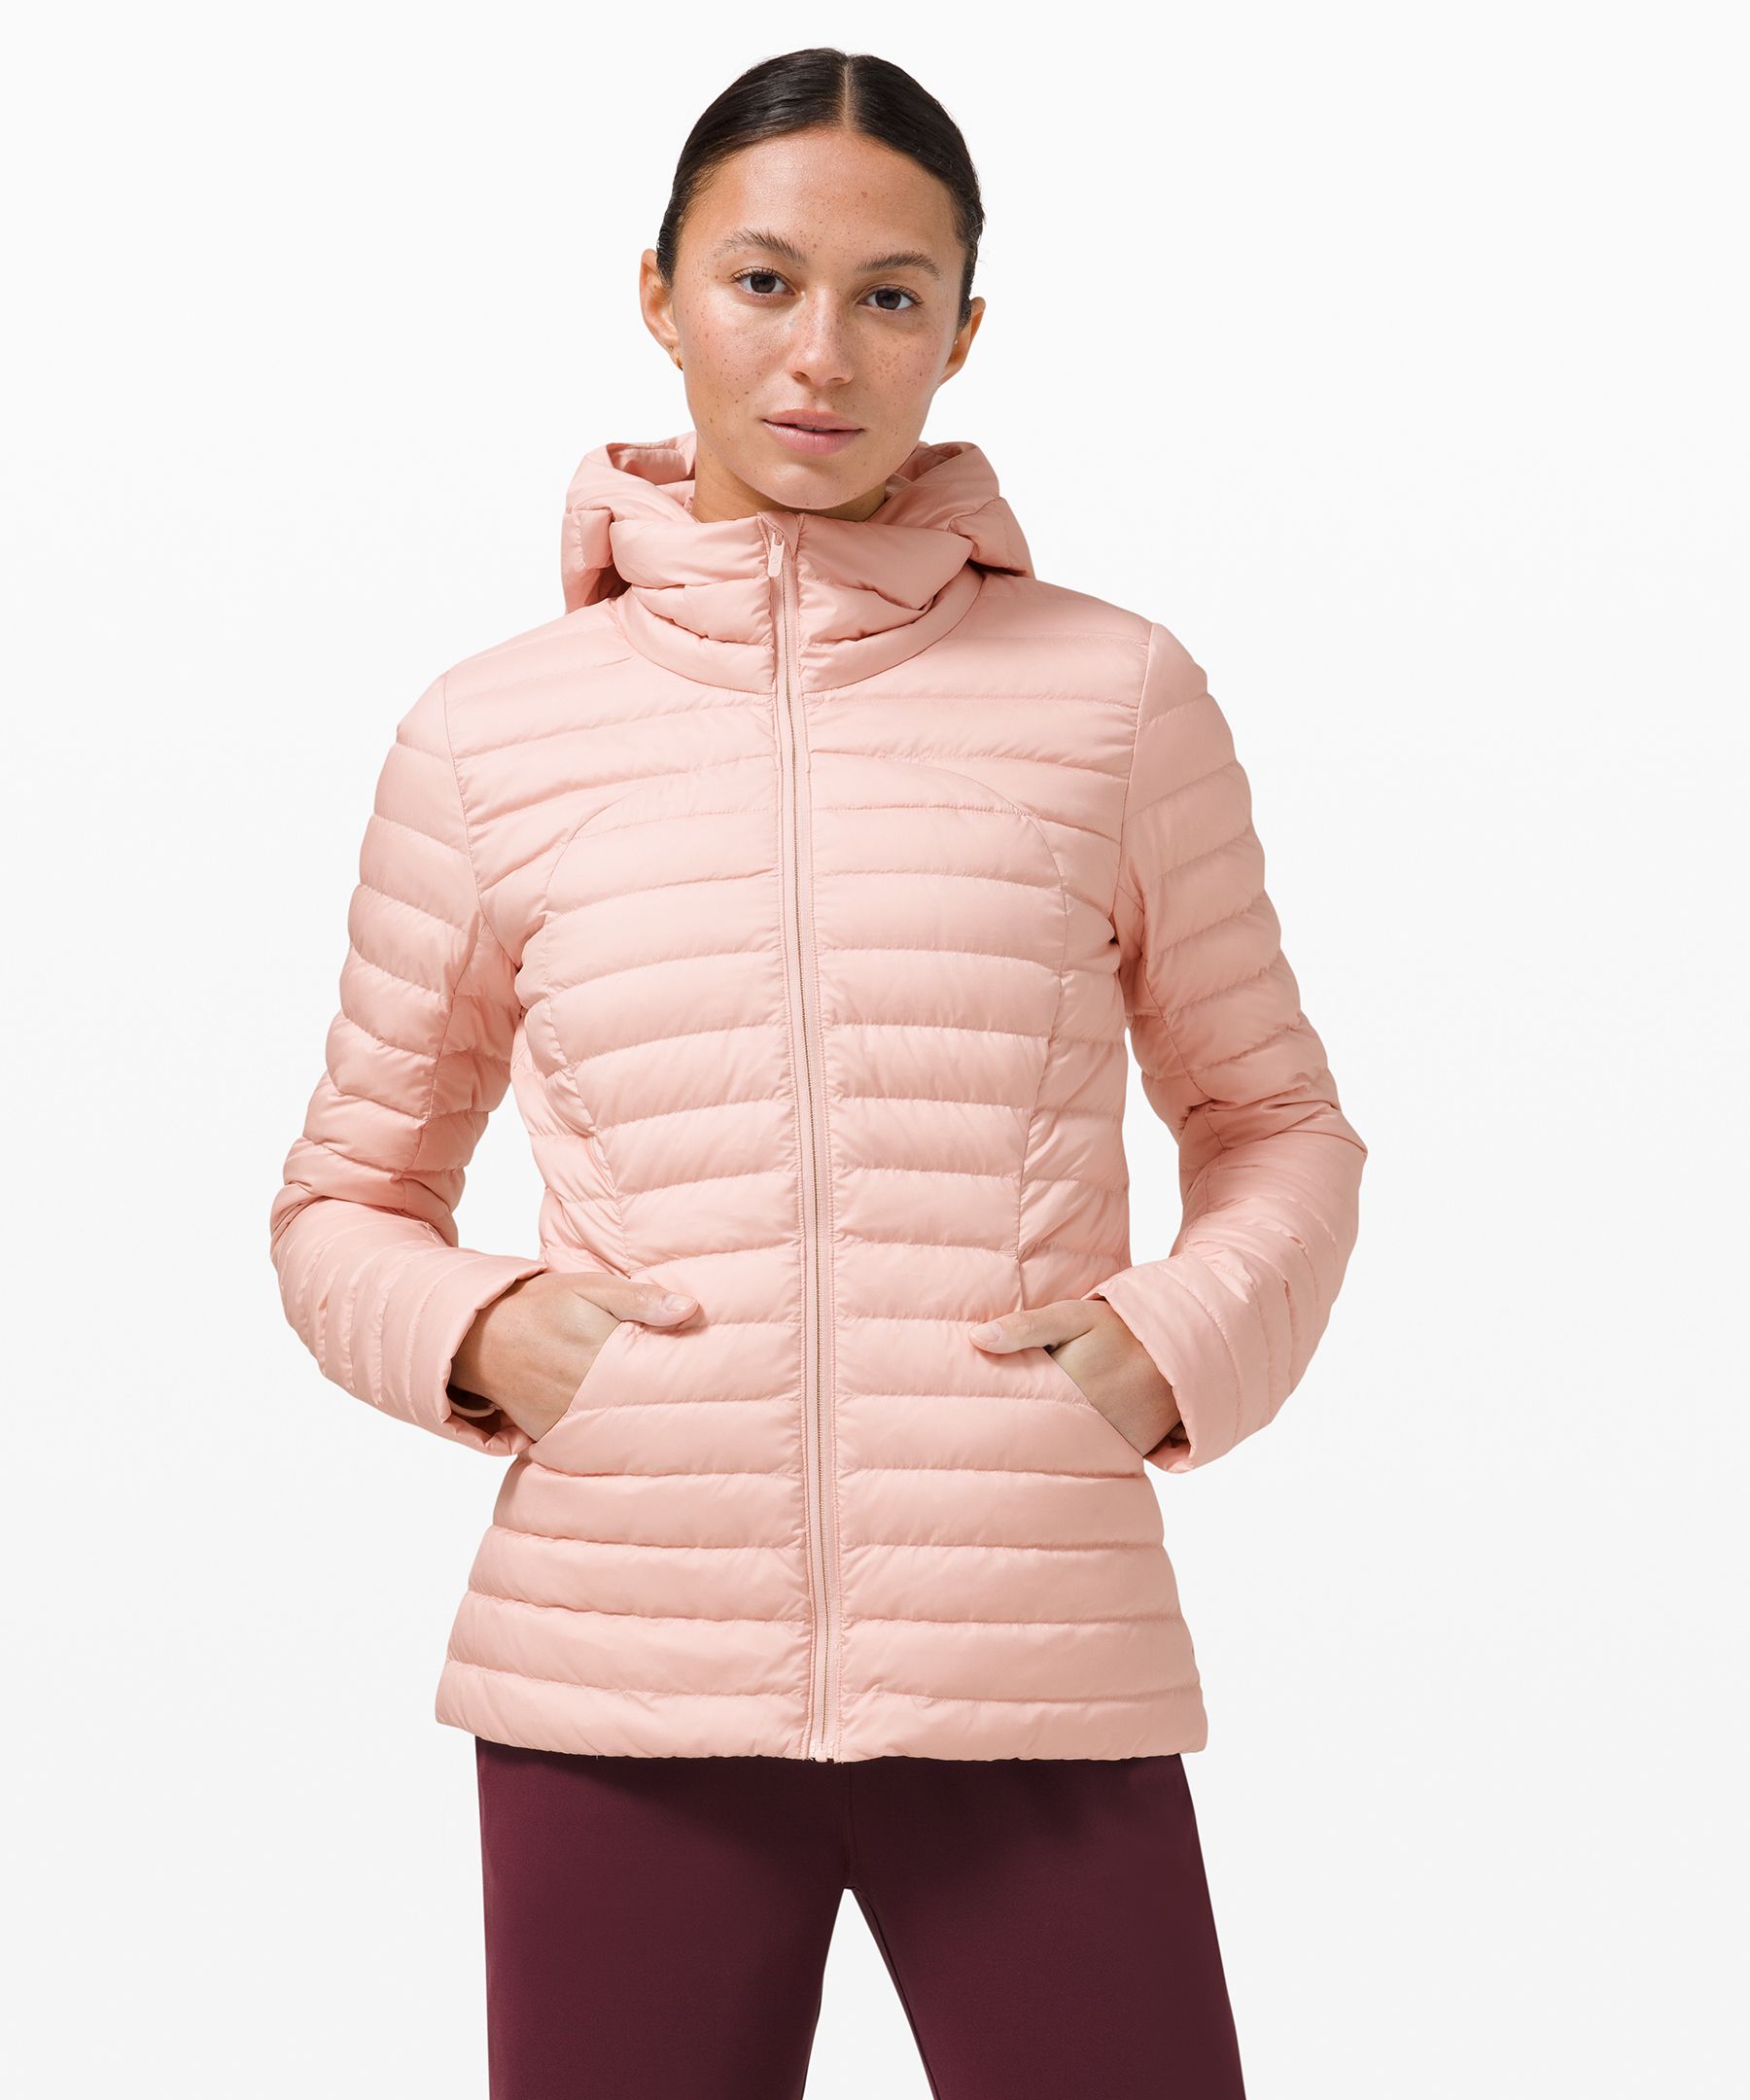 lululemon pack it down jacket review